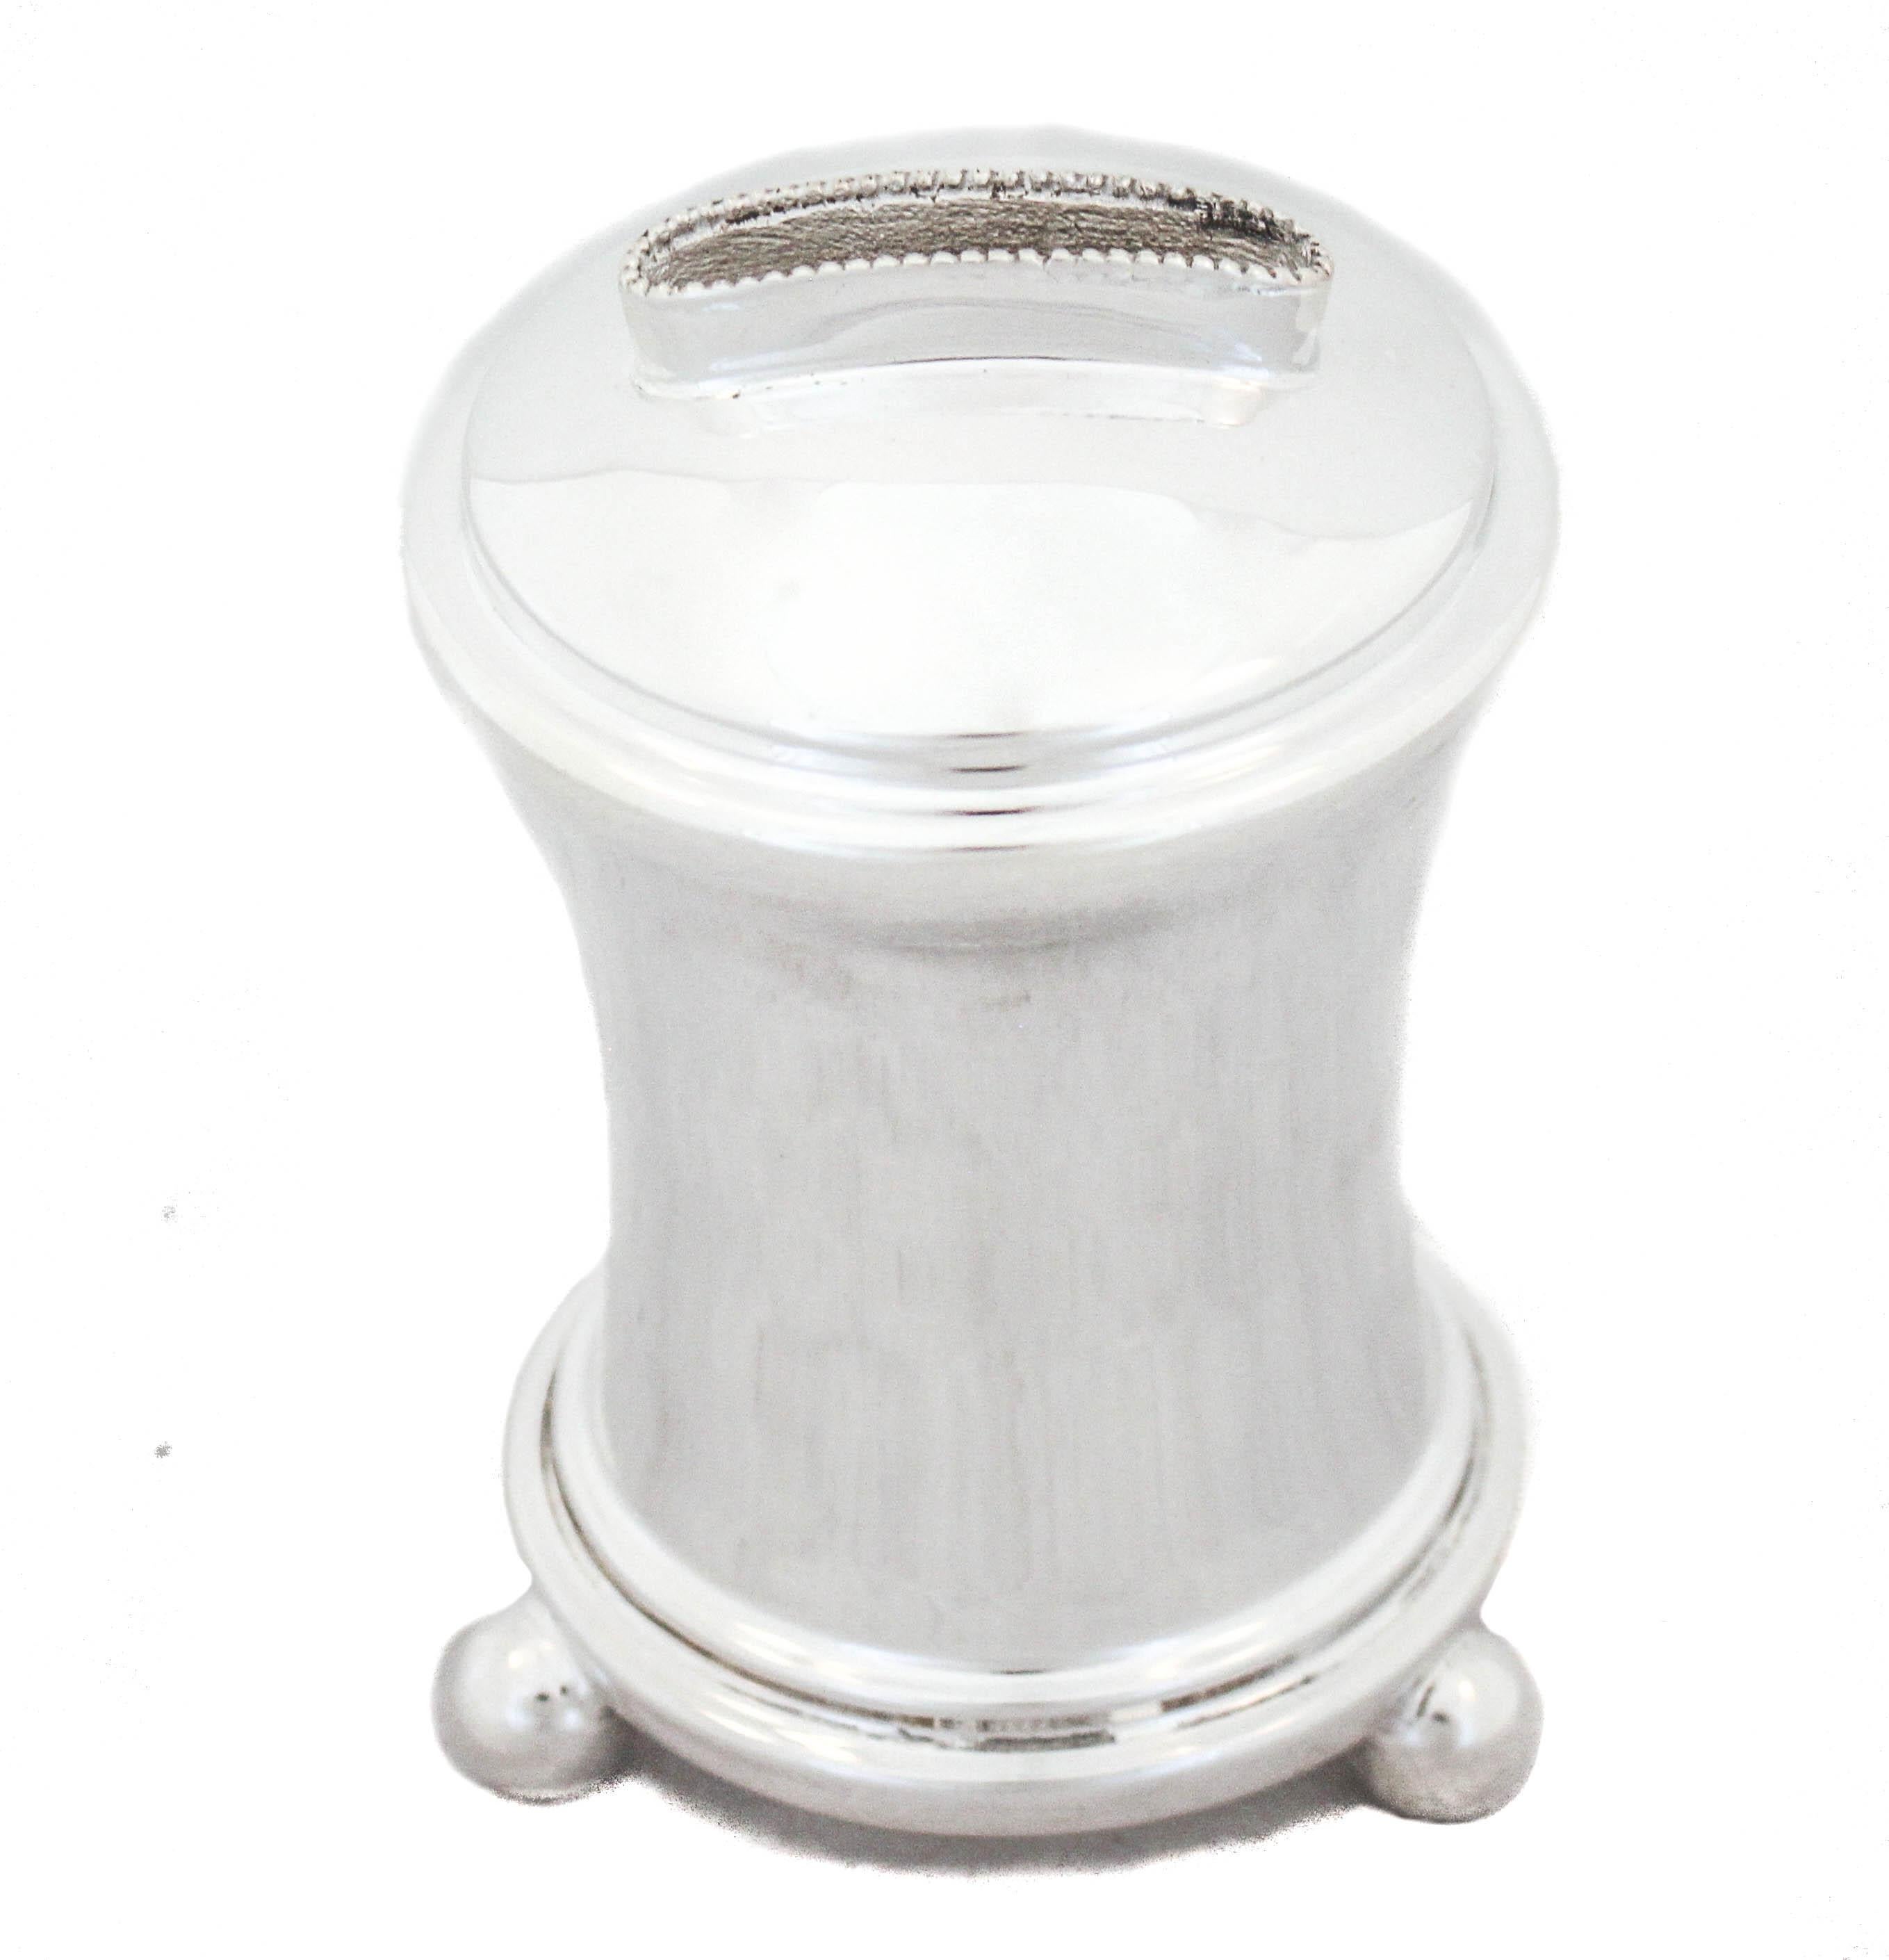 Being offered is a sterling silver charity (Tzedakah) box.  Sleek and contemporary it is elegant and timeless.  It stands on three round balls and has a slightly curved shape.   Charity is a basic tenant in all religions so a charity box could be